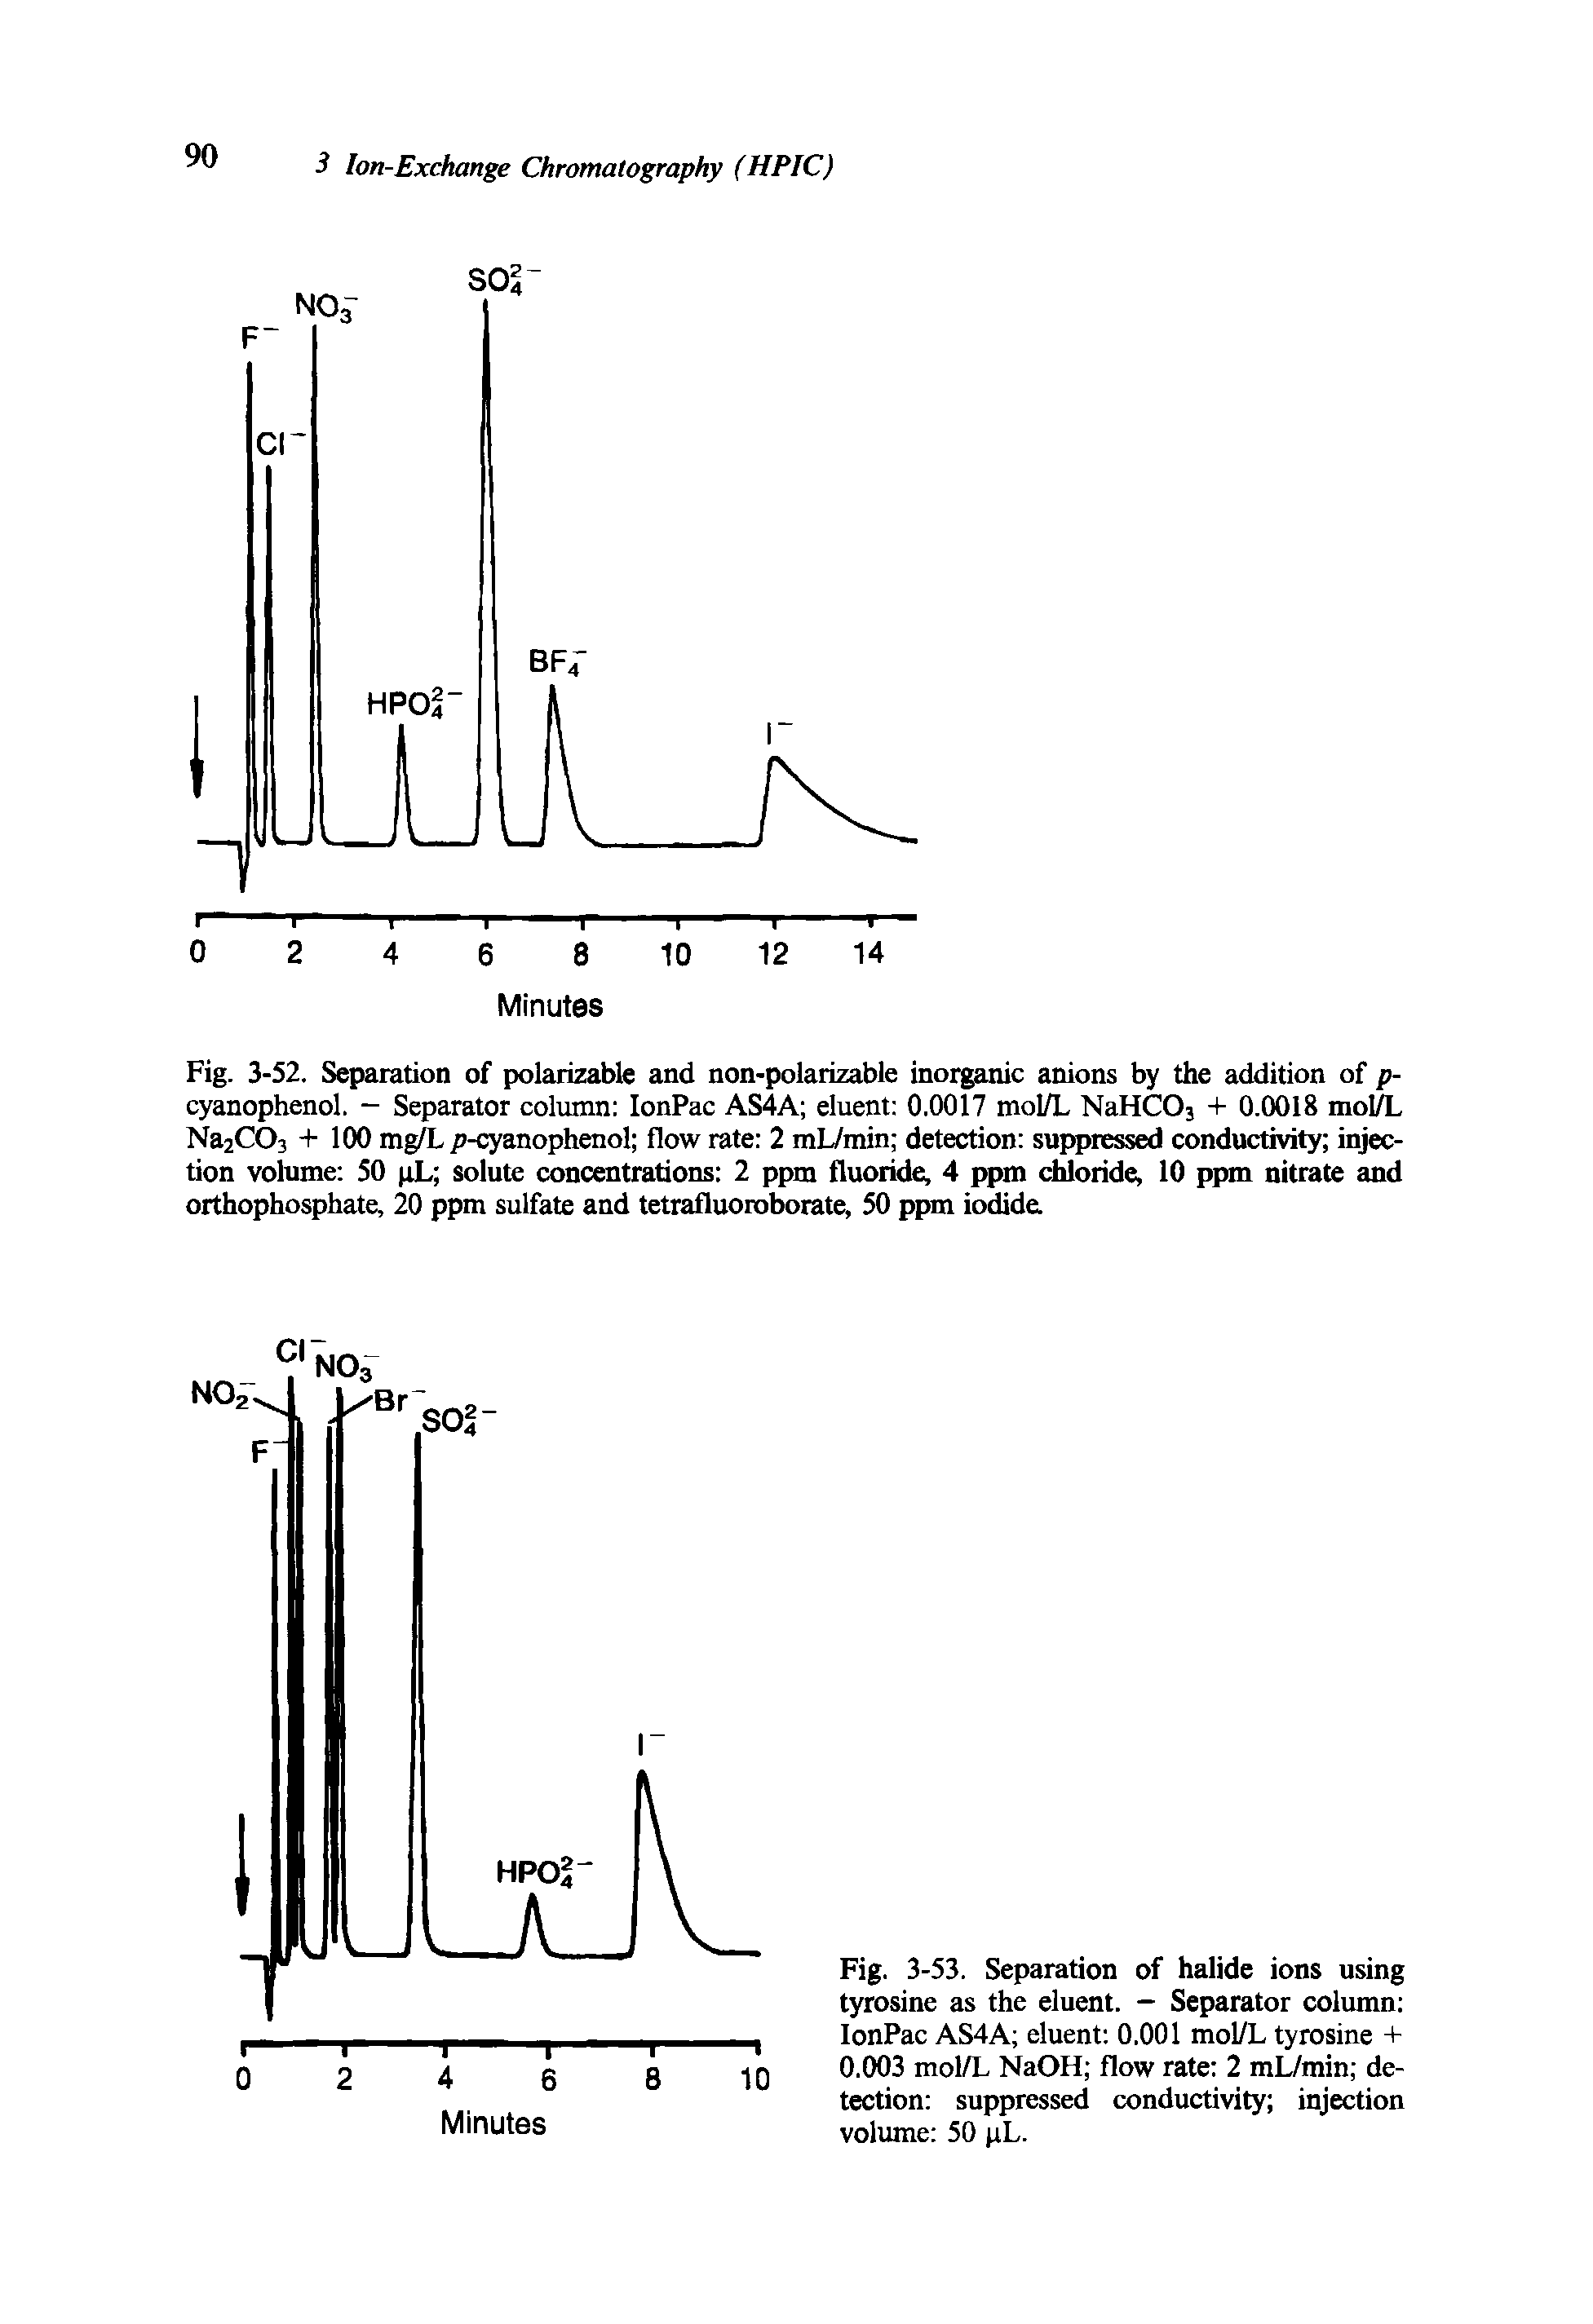 Fig. 3-53. Separation of halide ions using tyrosine as the eluent. - Separator column IonPac AS4A eluent 0.001 mol/L tyrosine + 0.003 mol/L NaOH flow rate 2 mL/min detection suppressed conductivity injection volume 50 pL.